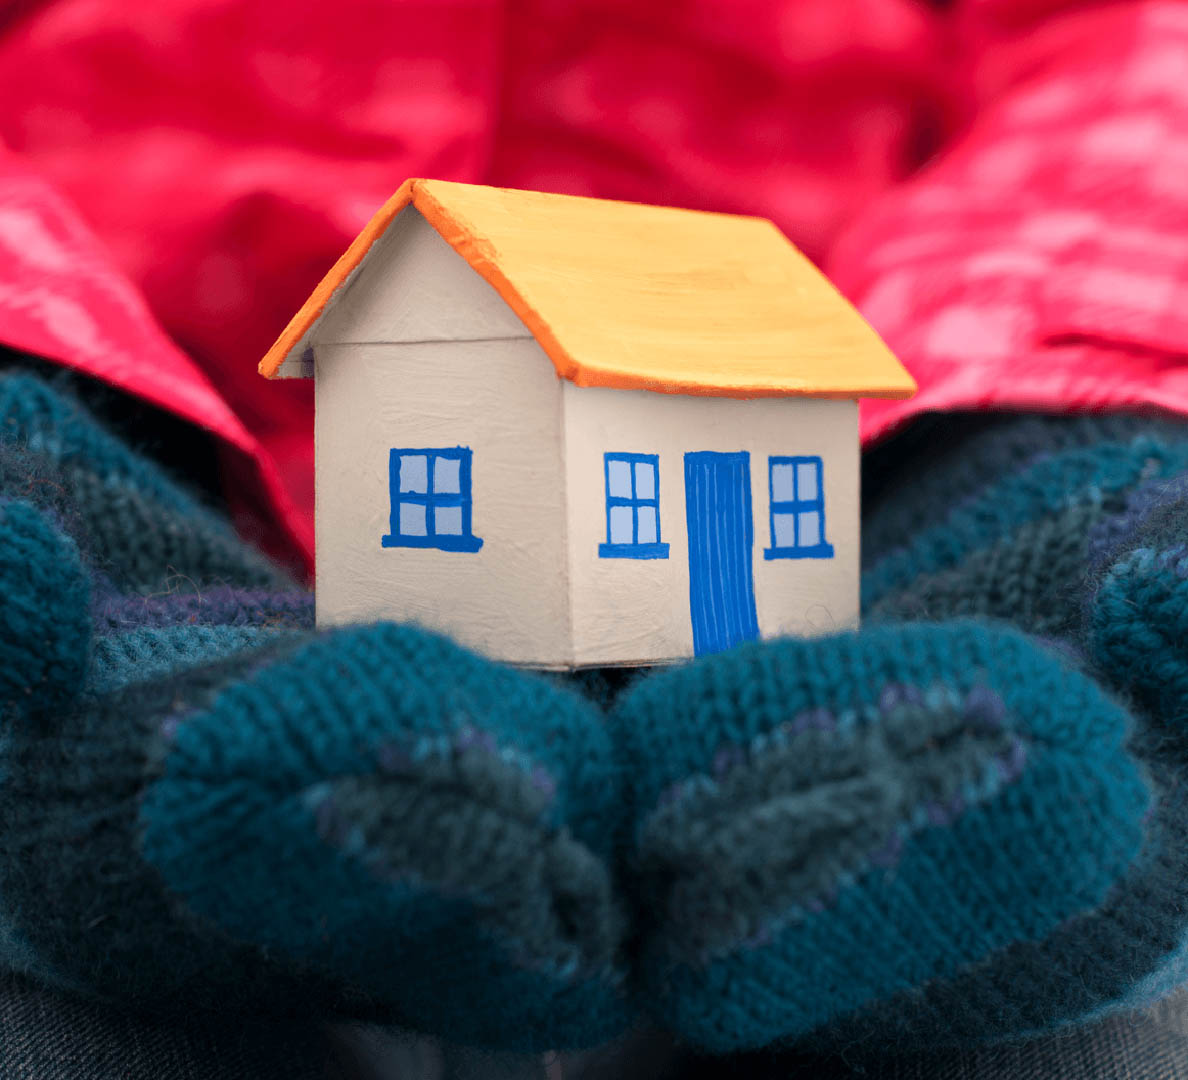 5 Reasons to Buy a New Home in the Winter Gloves Holding Home Image